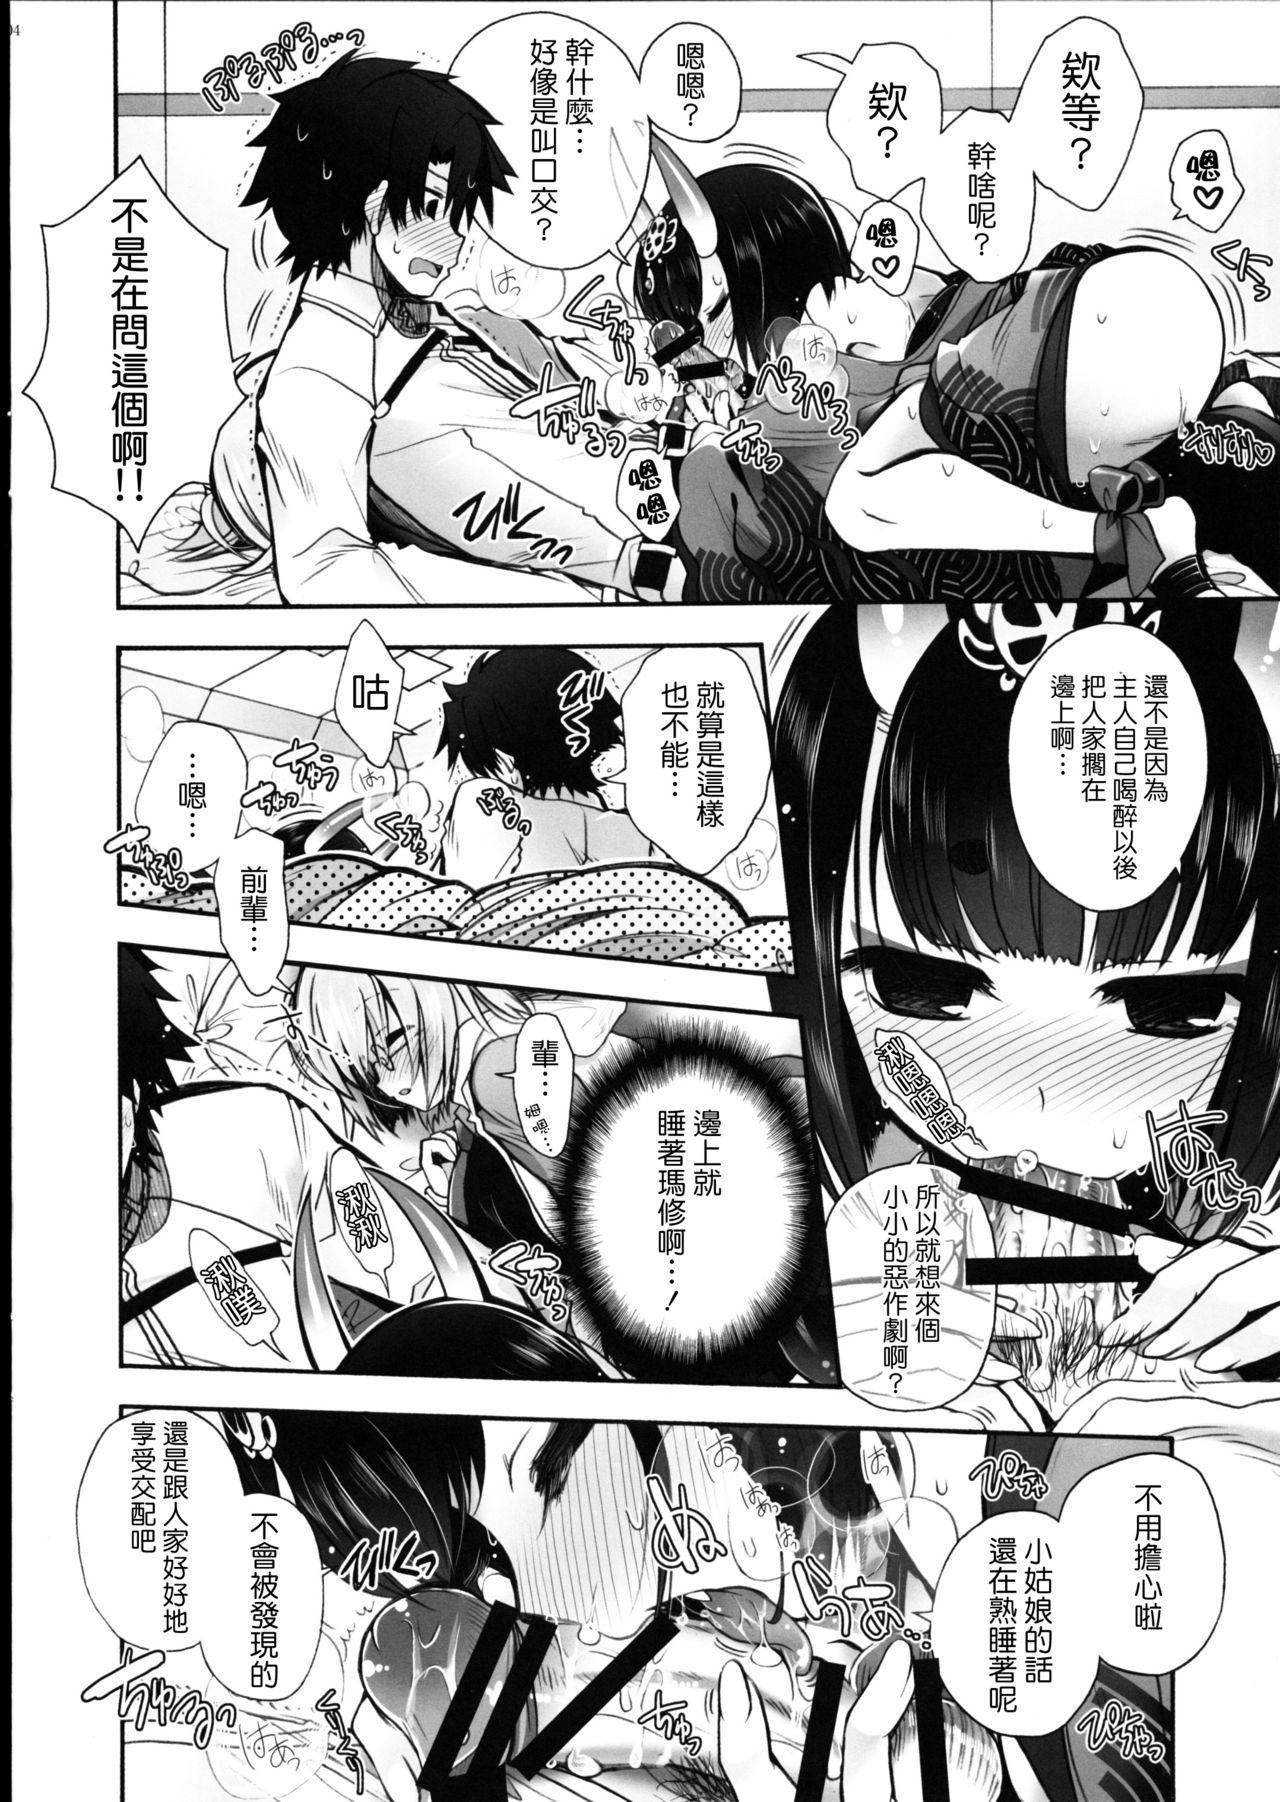 Horny Slut Kyouka Suigetsu - Fate grand order Student - Page 4